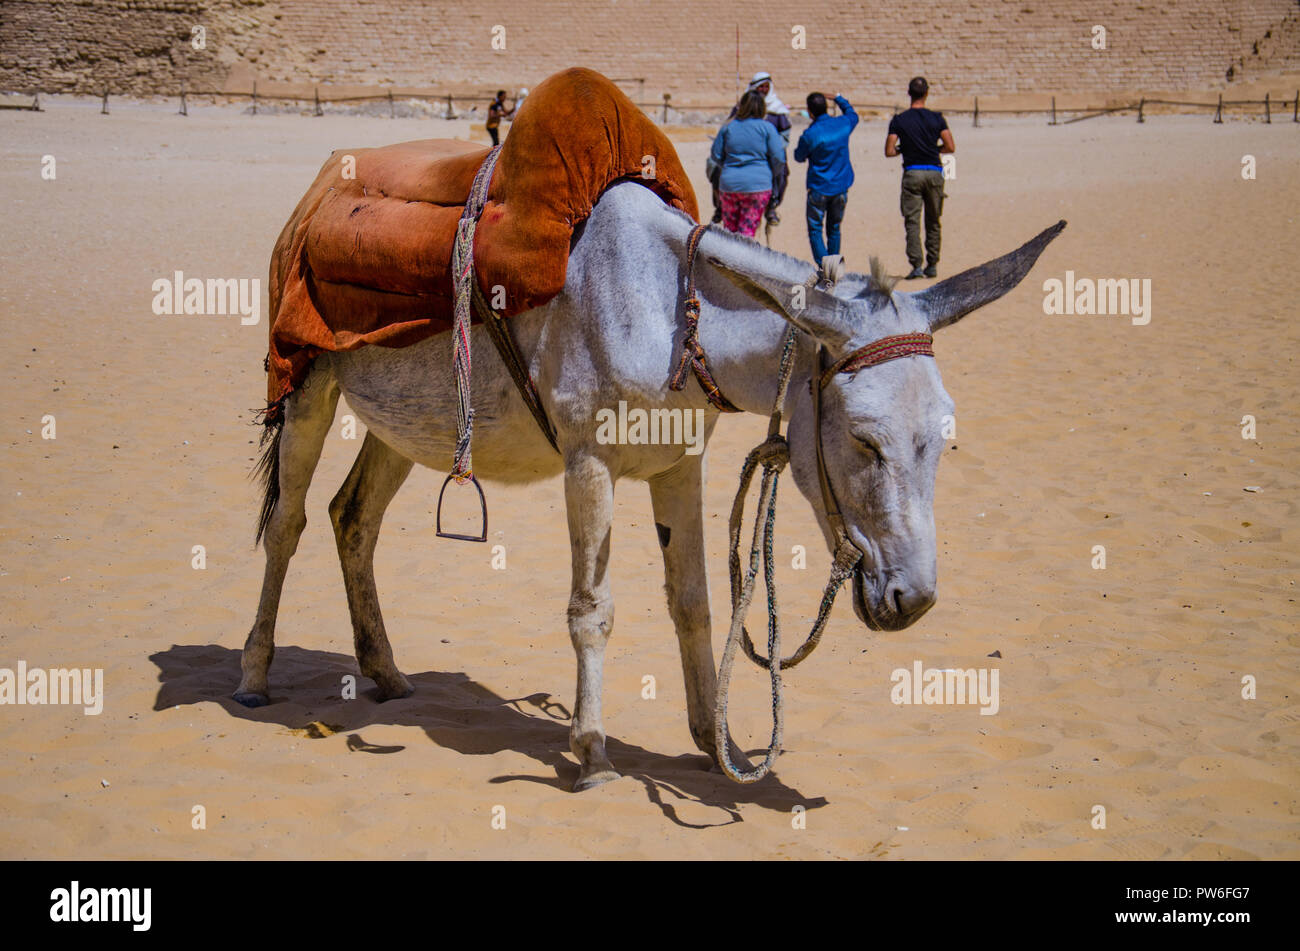 Saqqara, Unesco World Heritage, Cairo, Egypt - April 2018. Egyptian man in traditional clothes rides a mule. Stock Photo